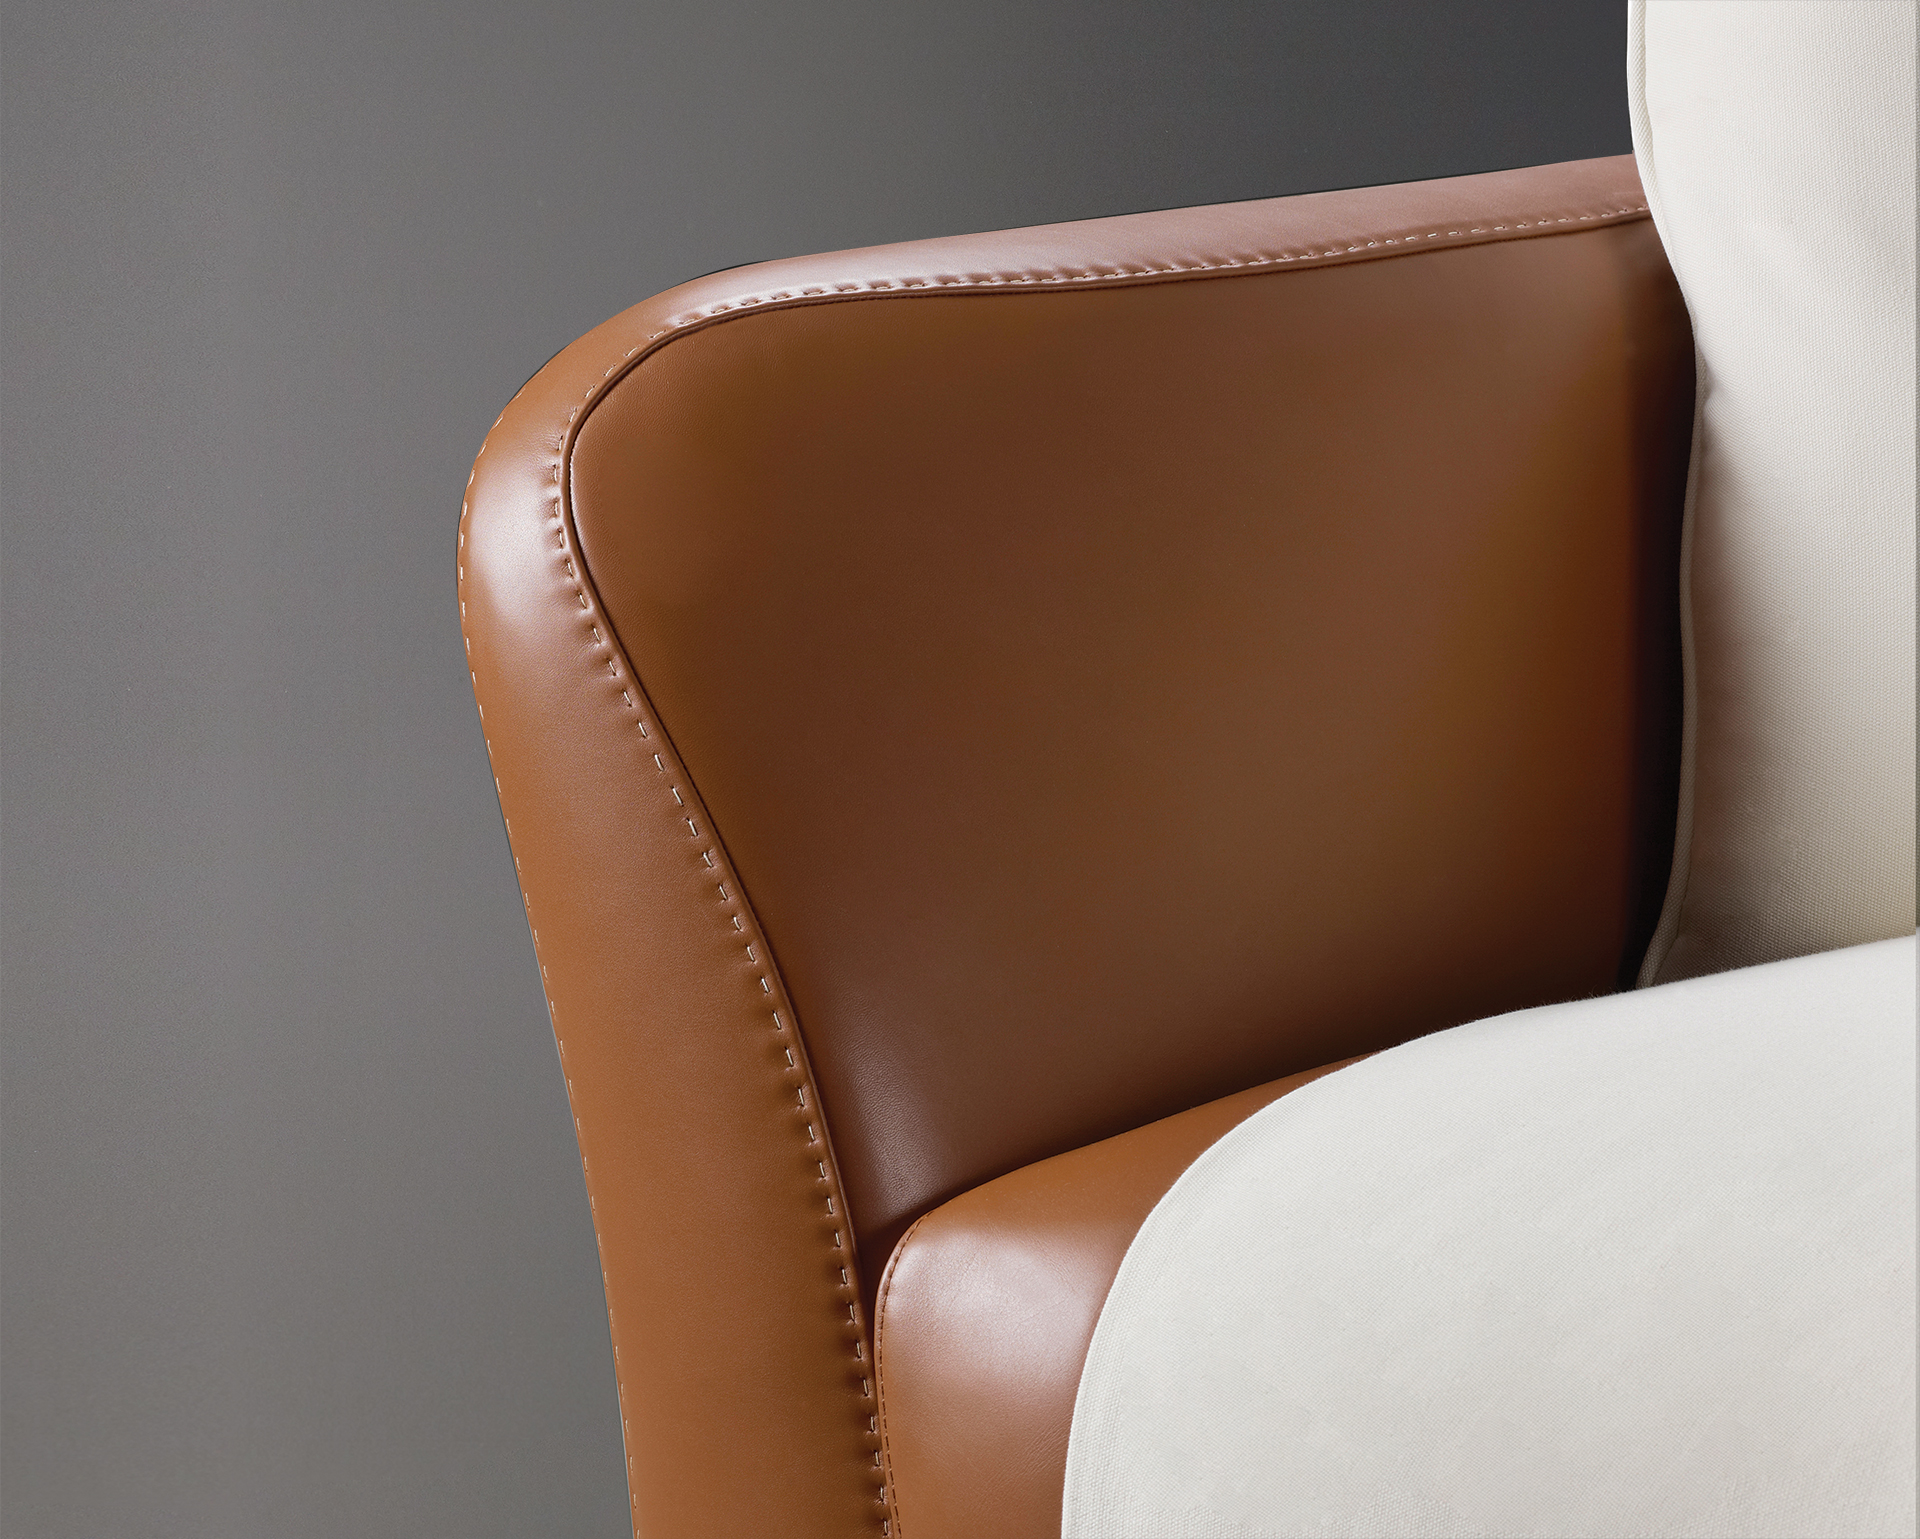 Leather detail of Shangri-la, a wooden sofa covered in leather and fabric, from Promemoria's catalogue | Promemoria